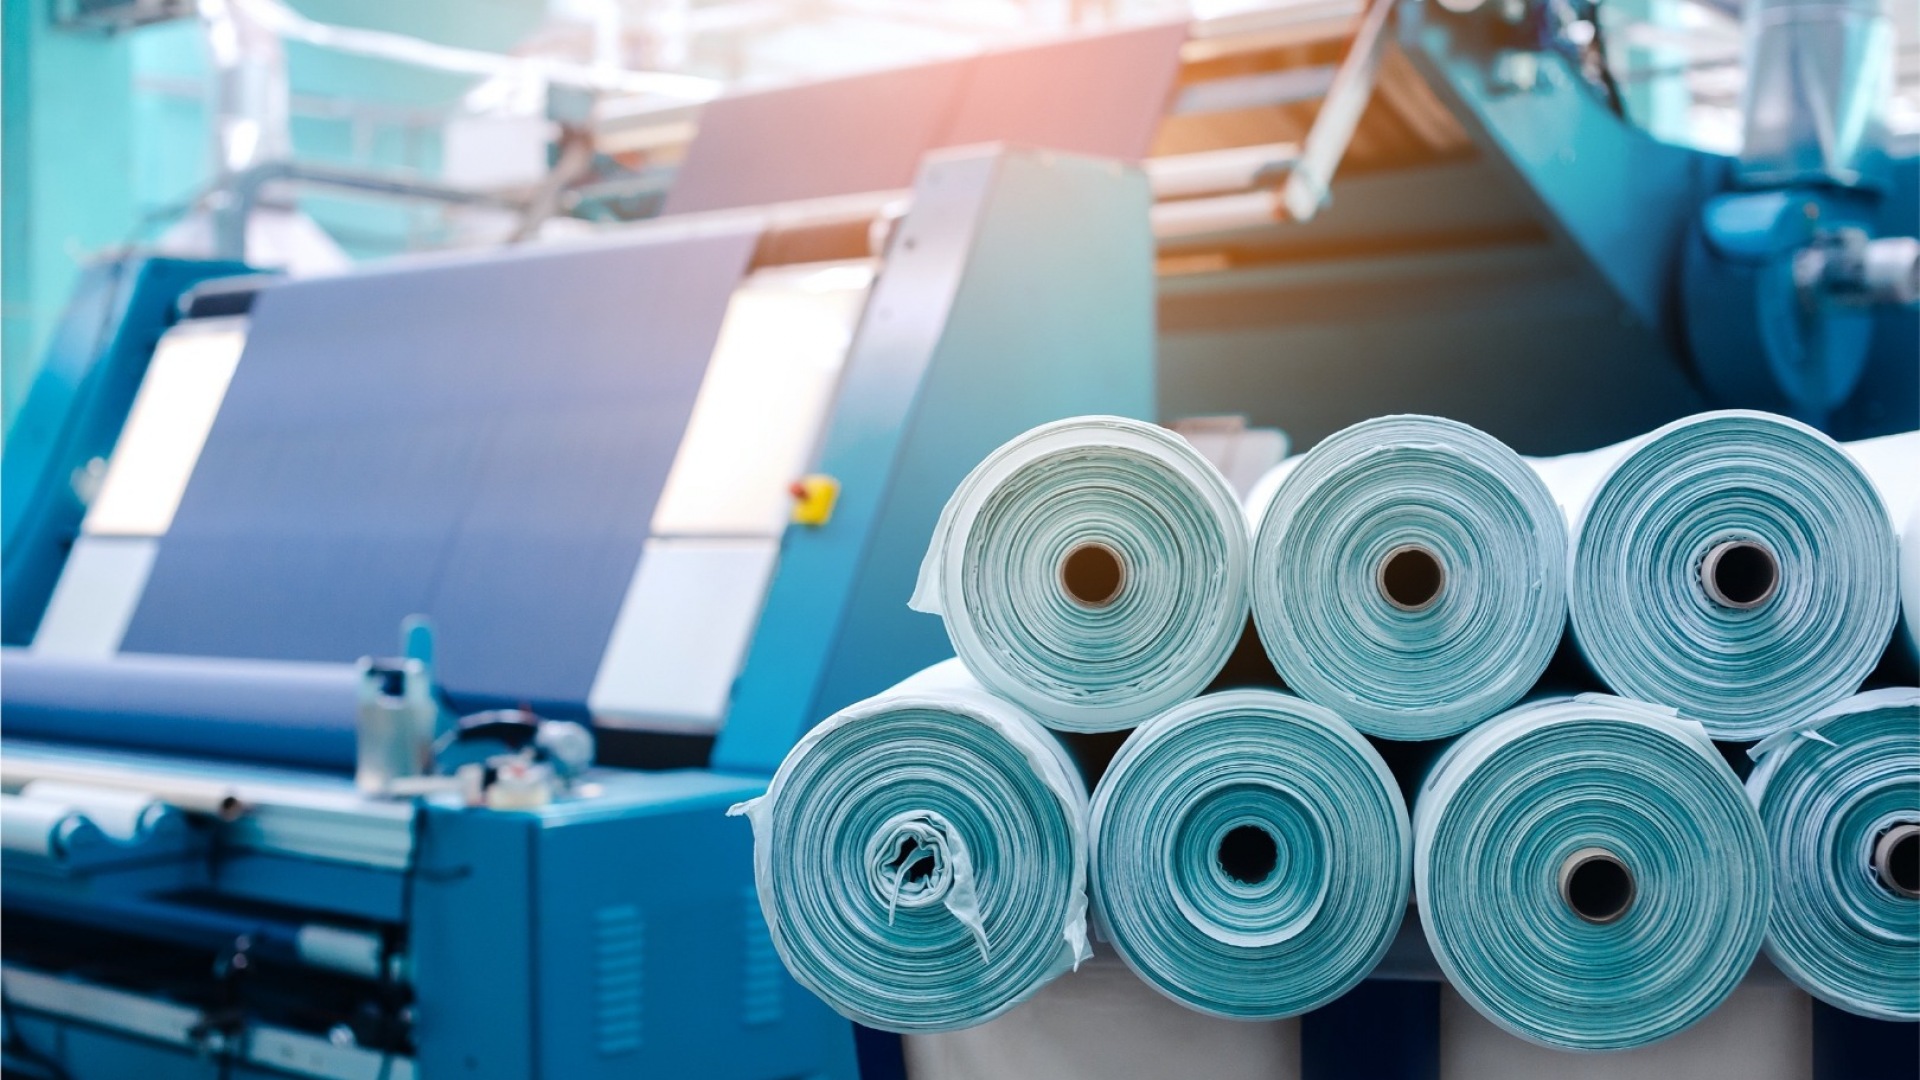 Specialist Textile Manufacturing.1632231986 